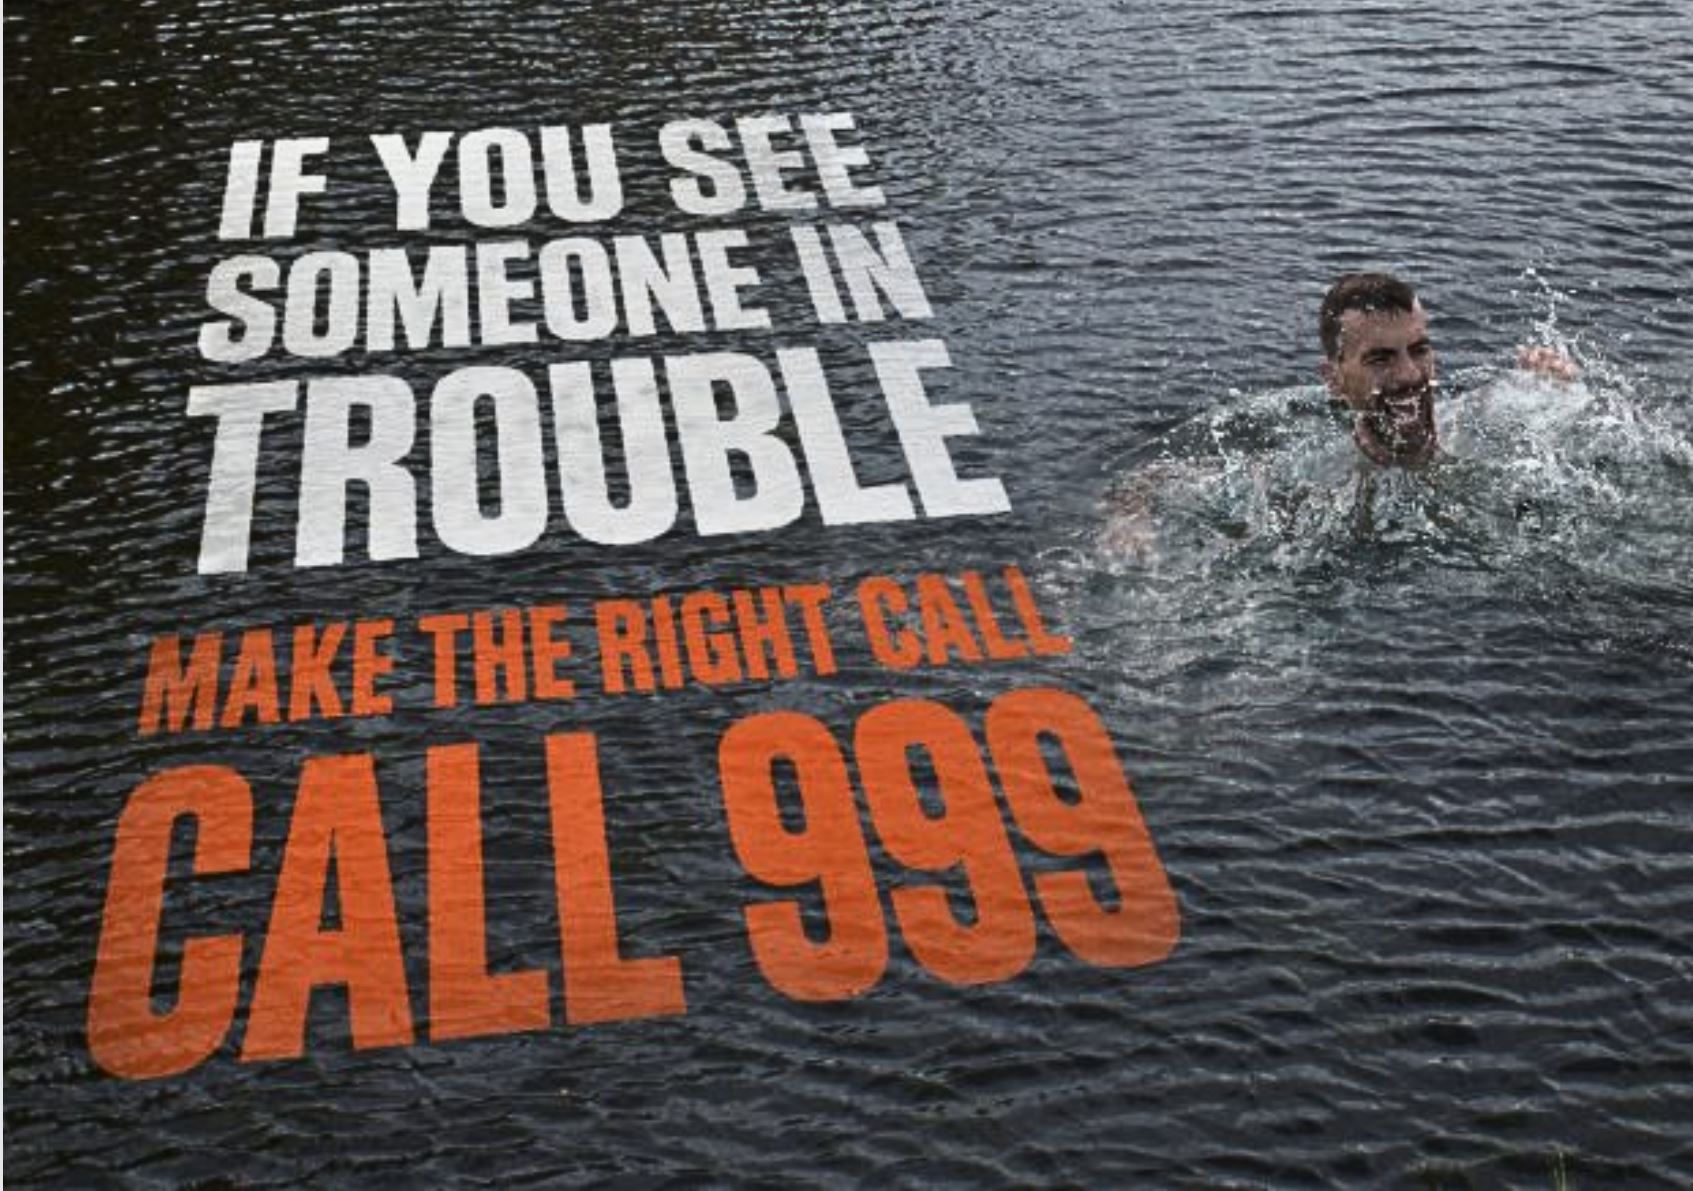 If you see someone in trouble, make the right call. Call 999